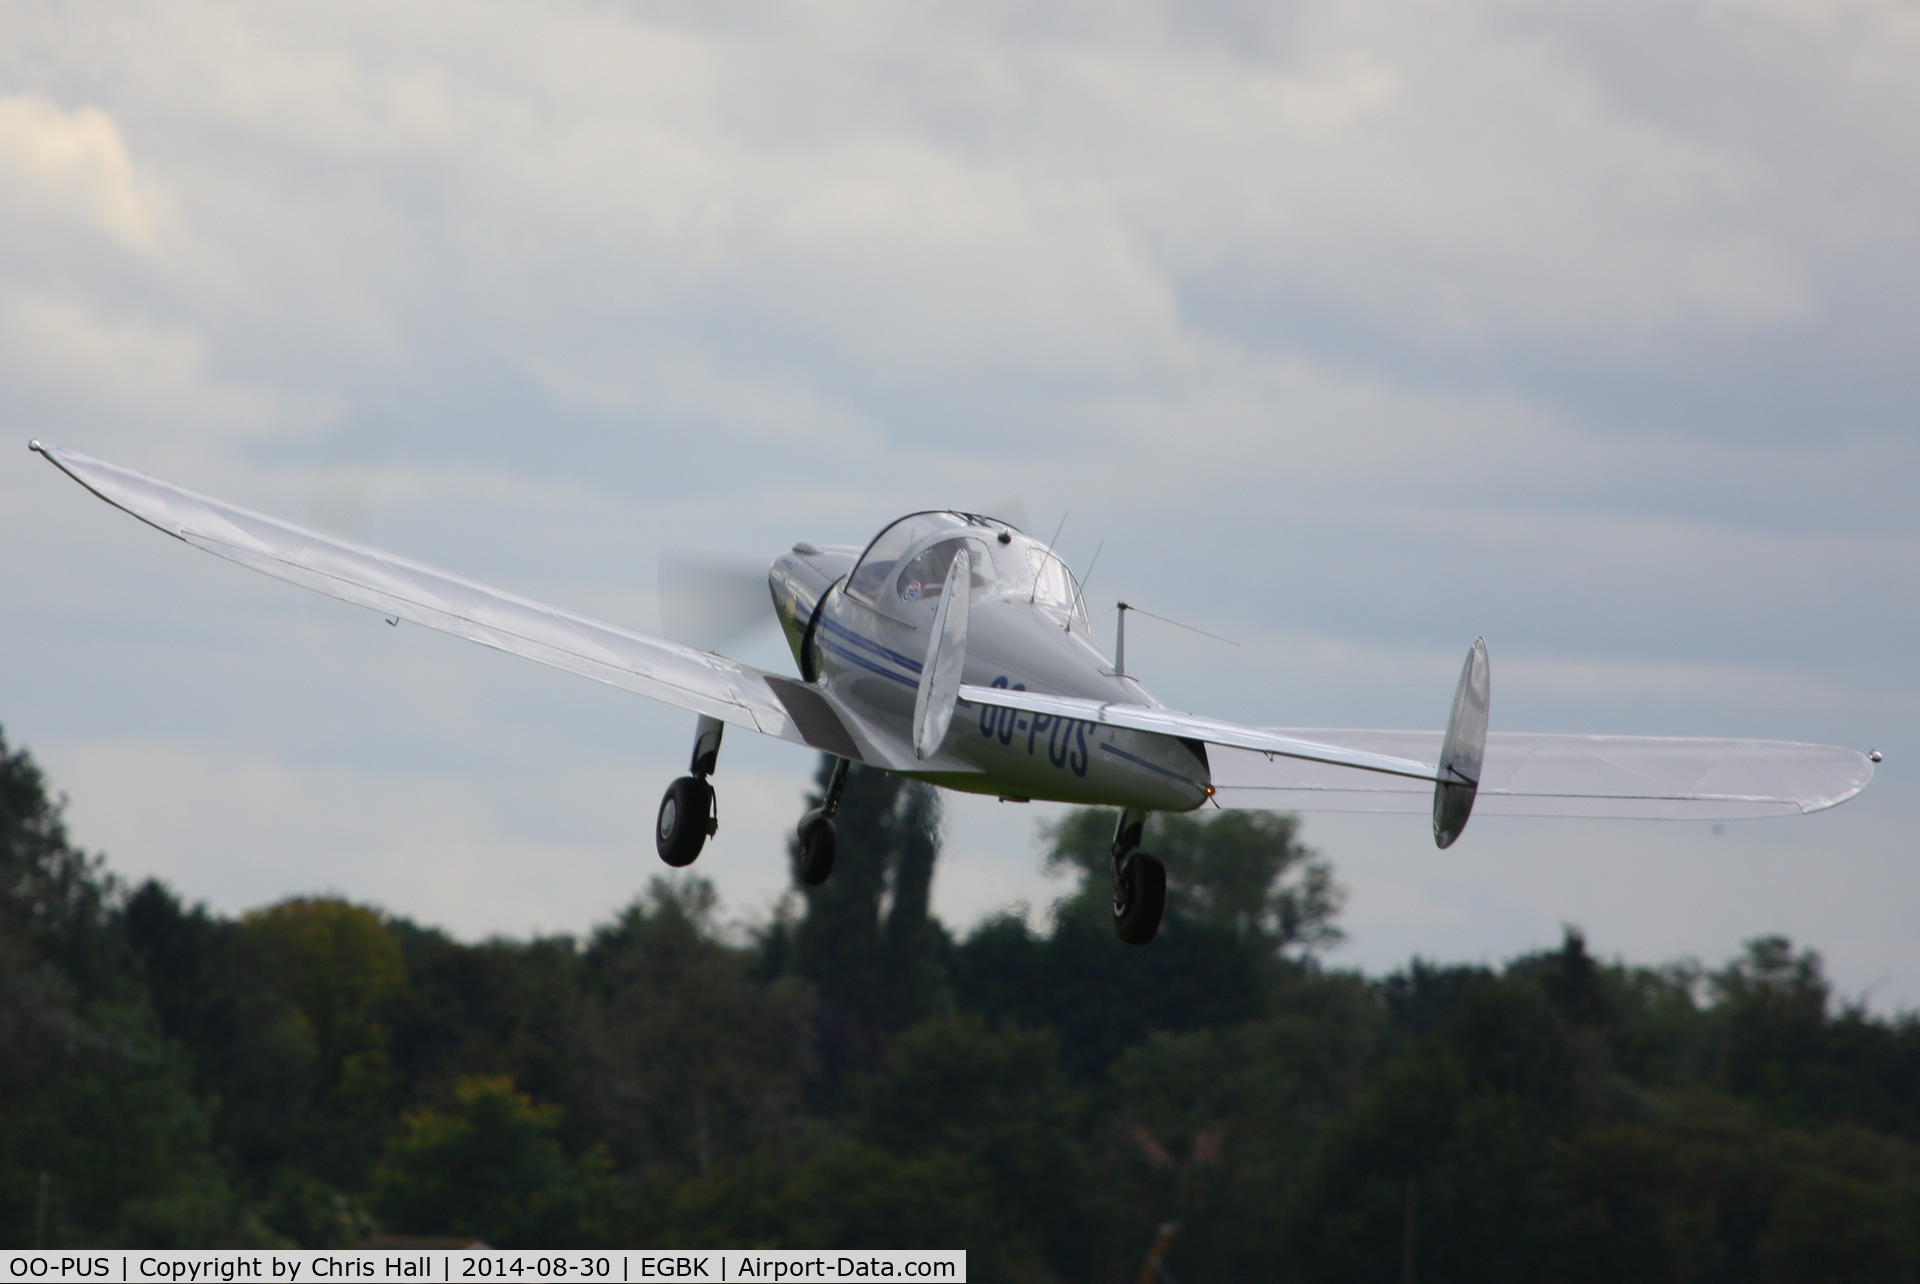 OO-PUS, 1947 Erco 415D Ercoupe C/N 4577, at the LAA Rally 2014, Sywell